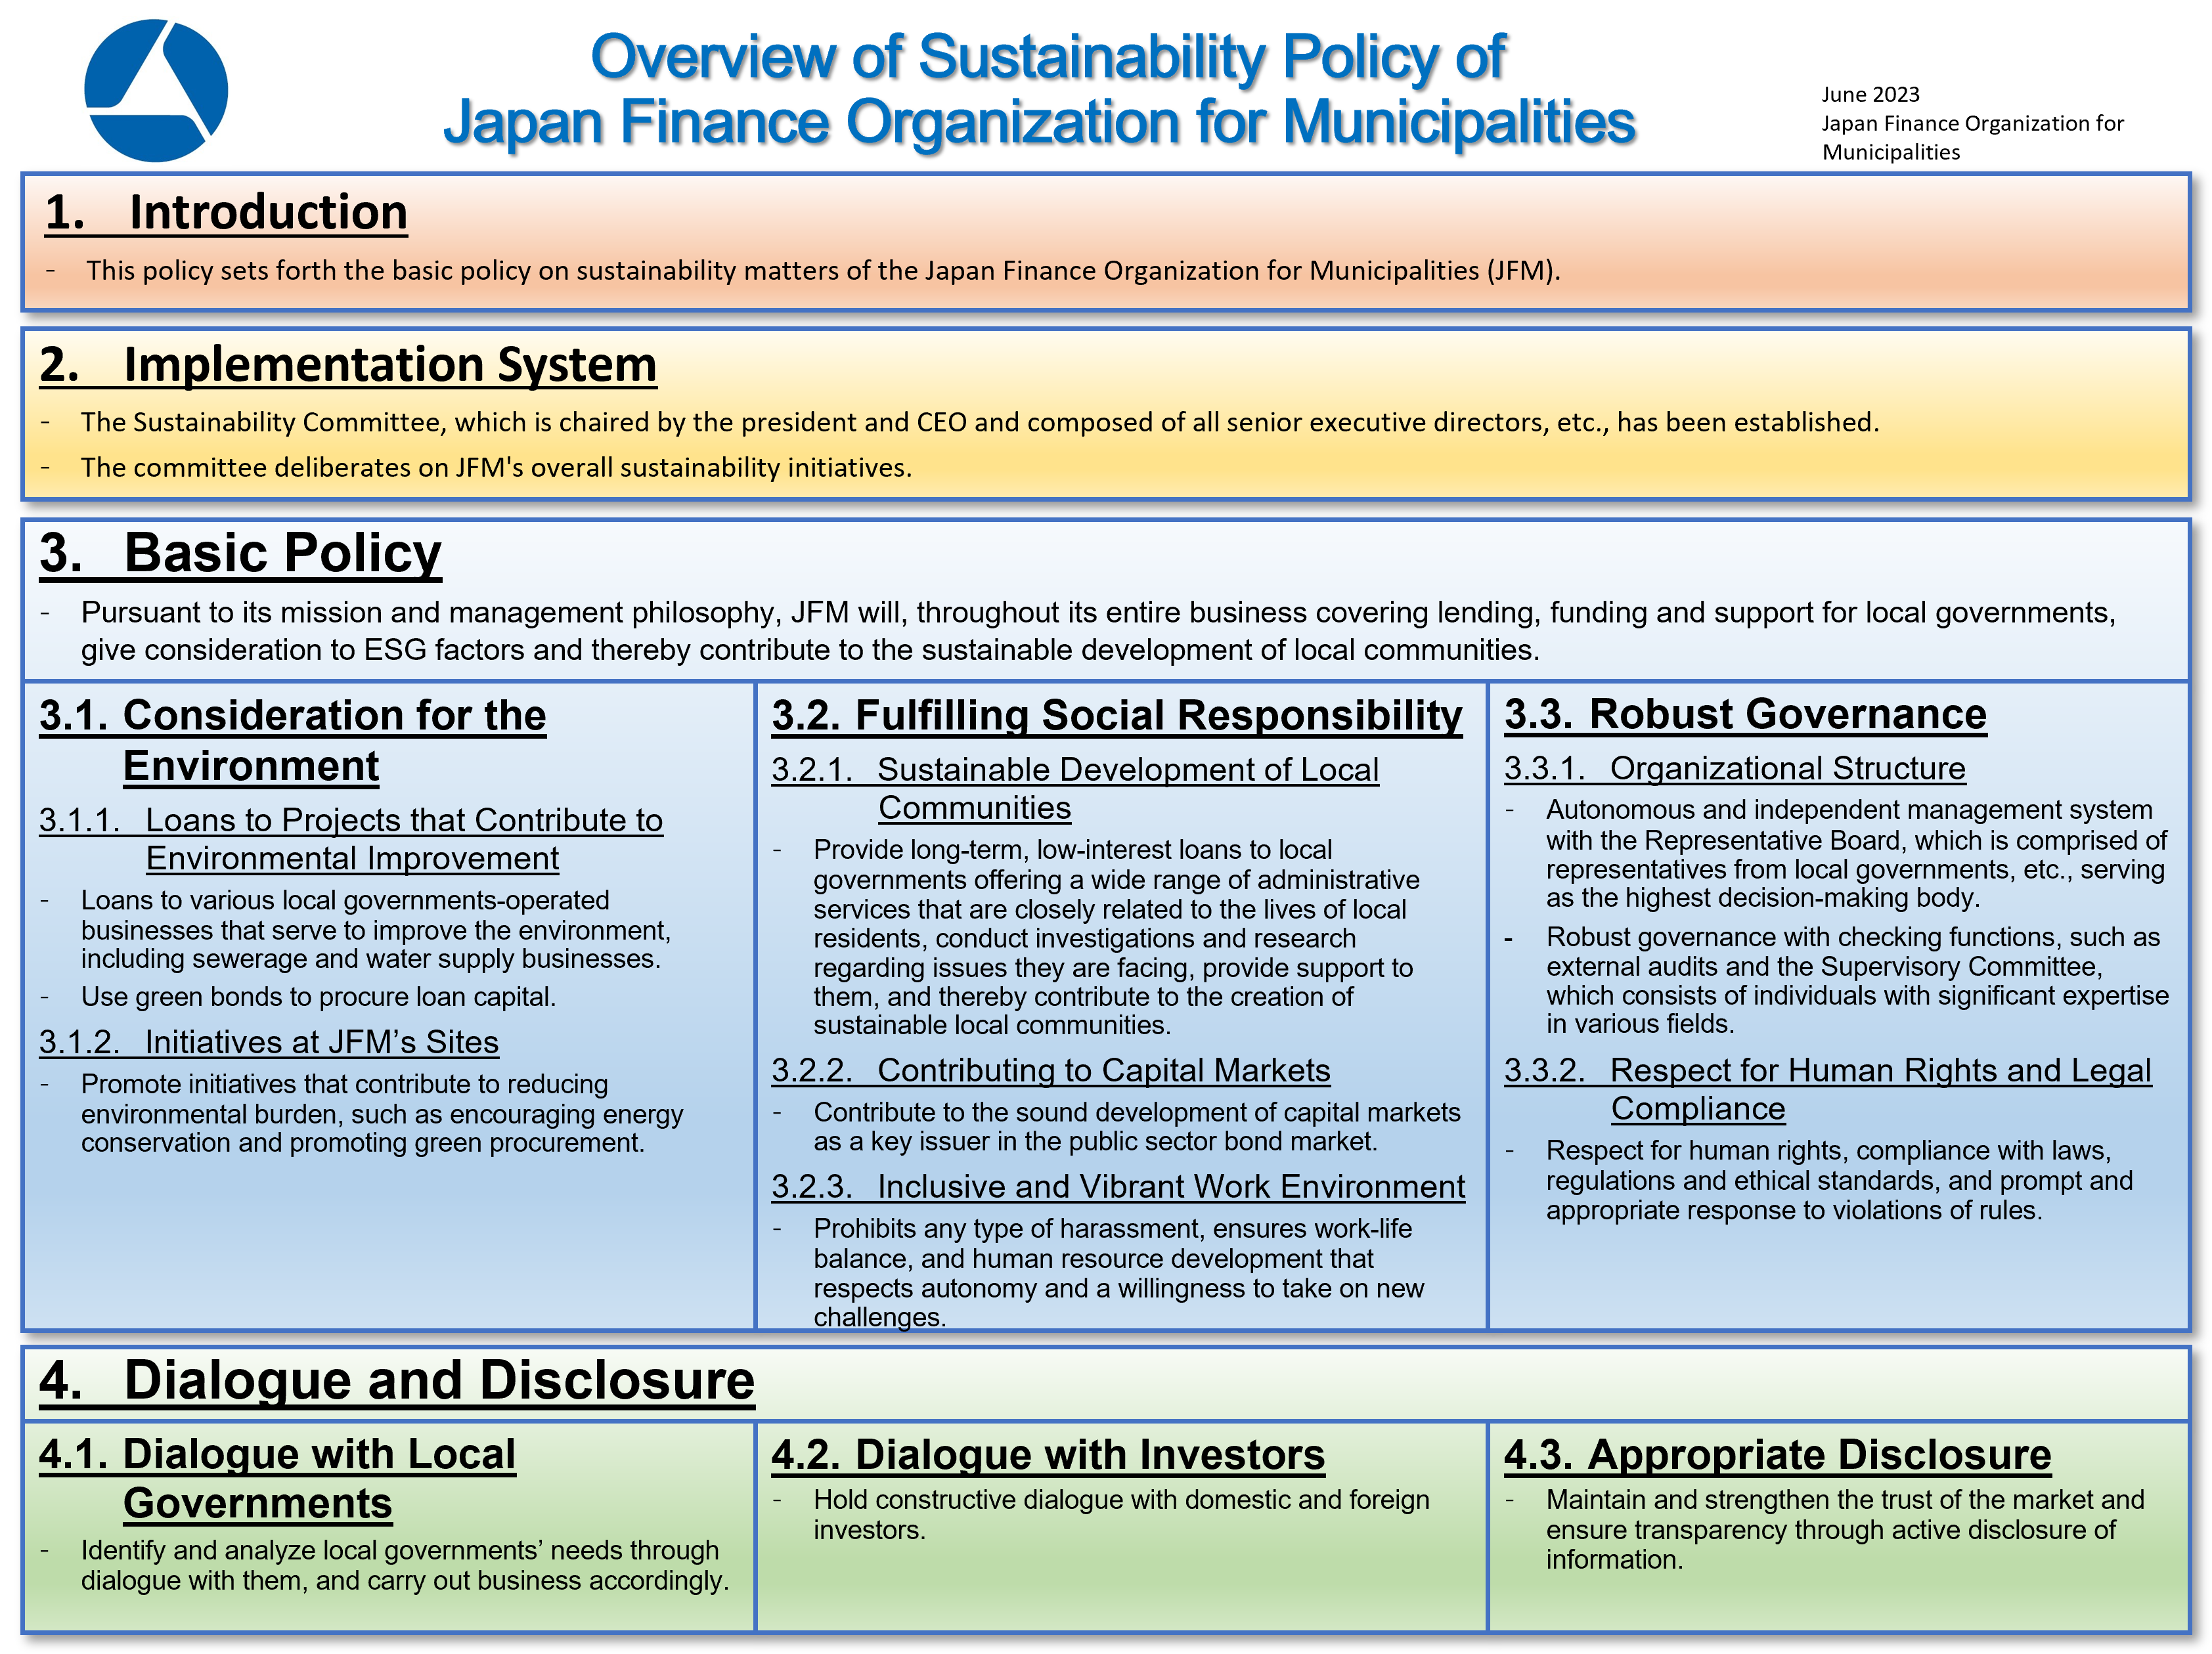 Overview of JFM Sustainability Policy